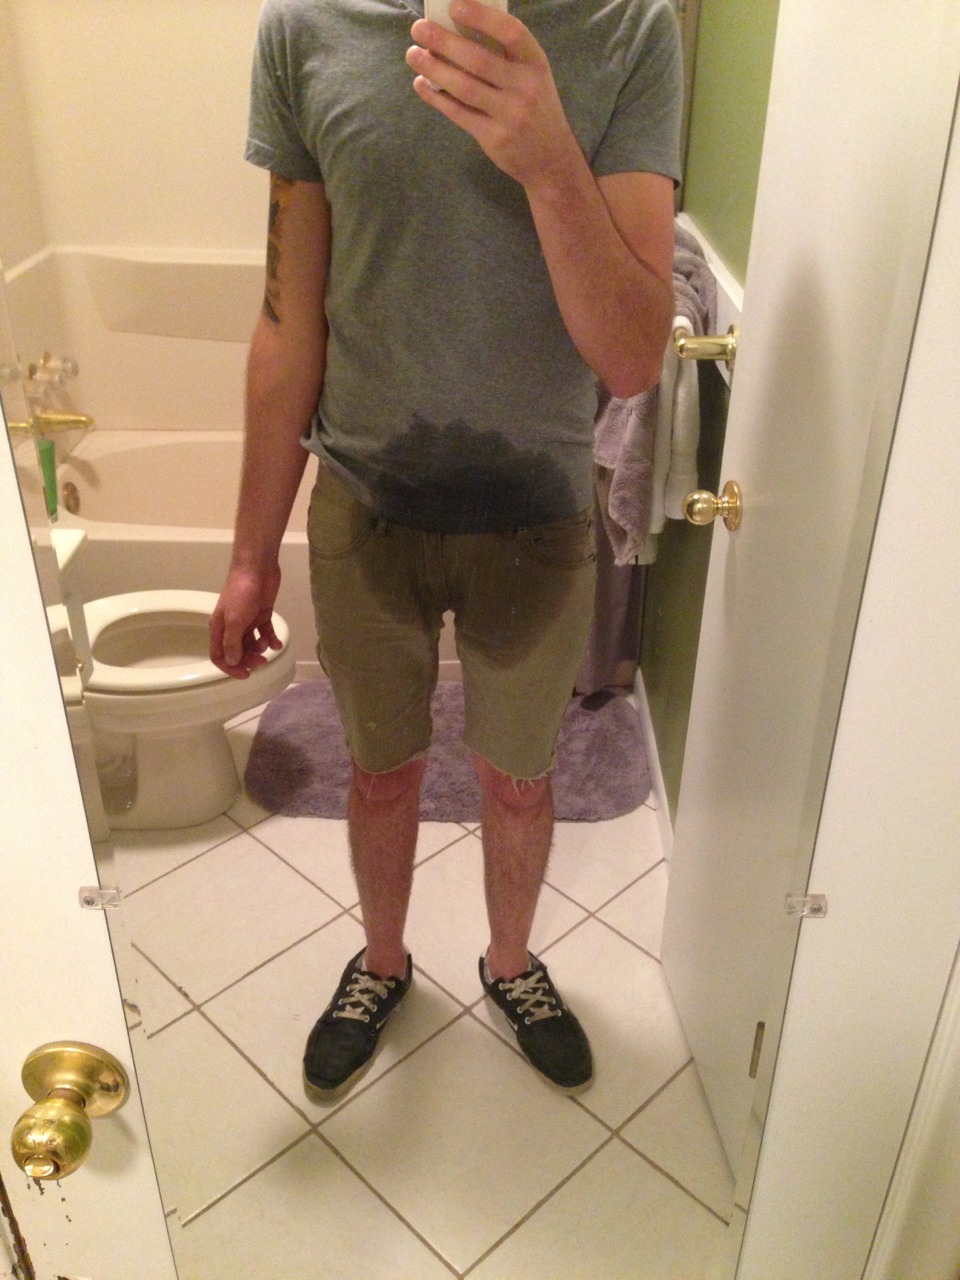 wettingmike:  Had a little bit of public pants wetting/messing fun in my shorts and